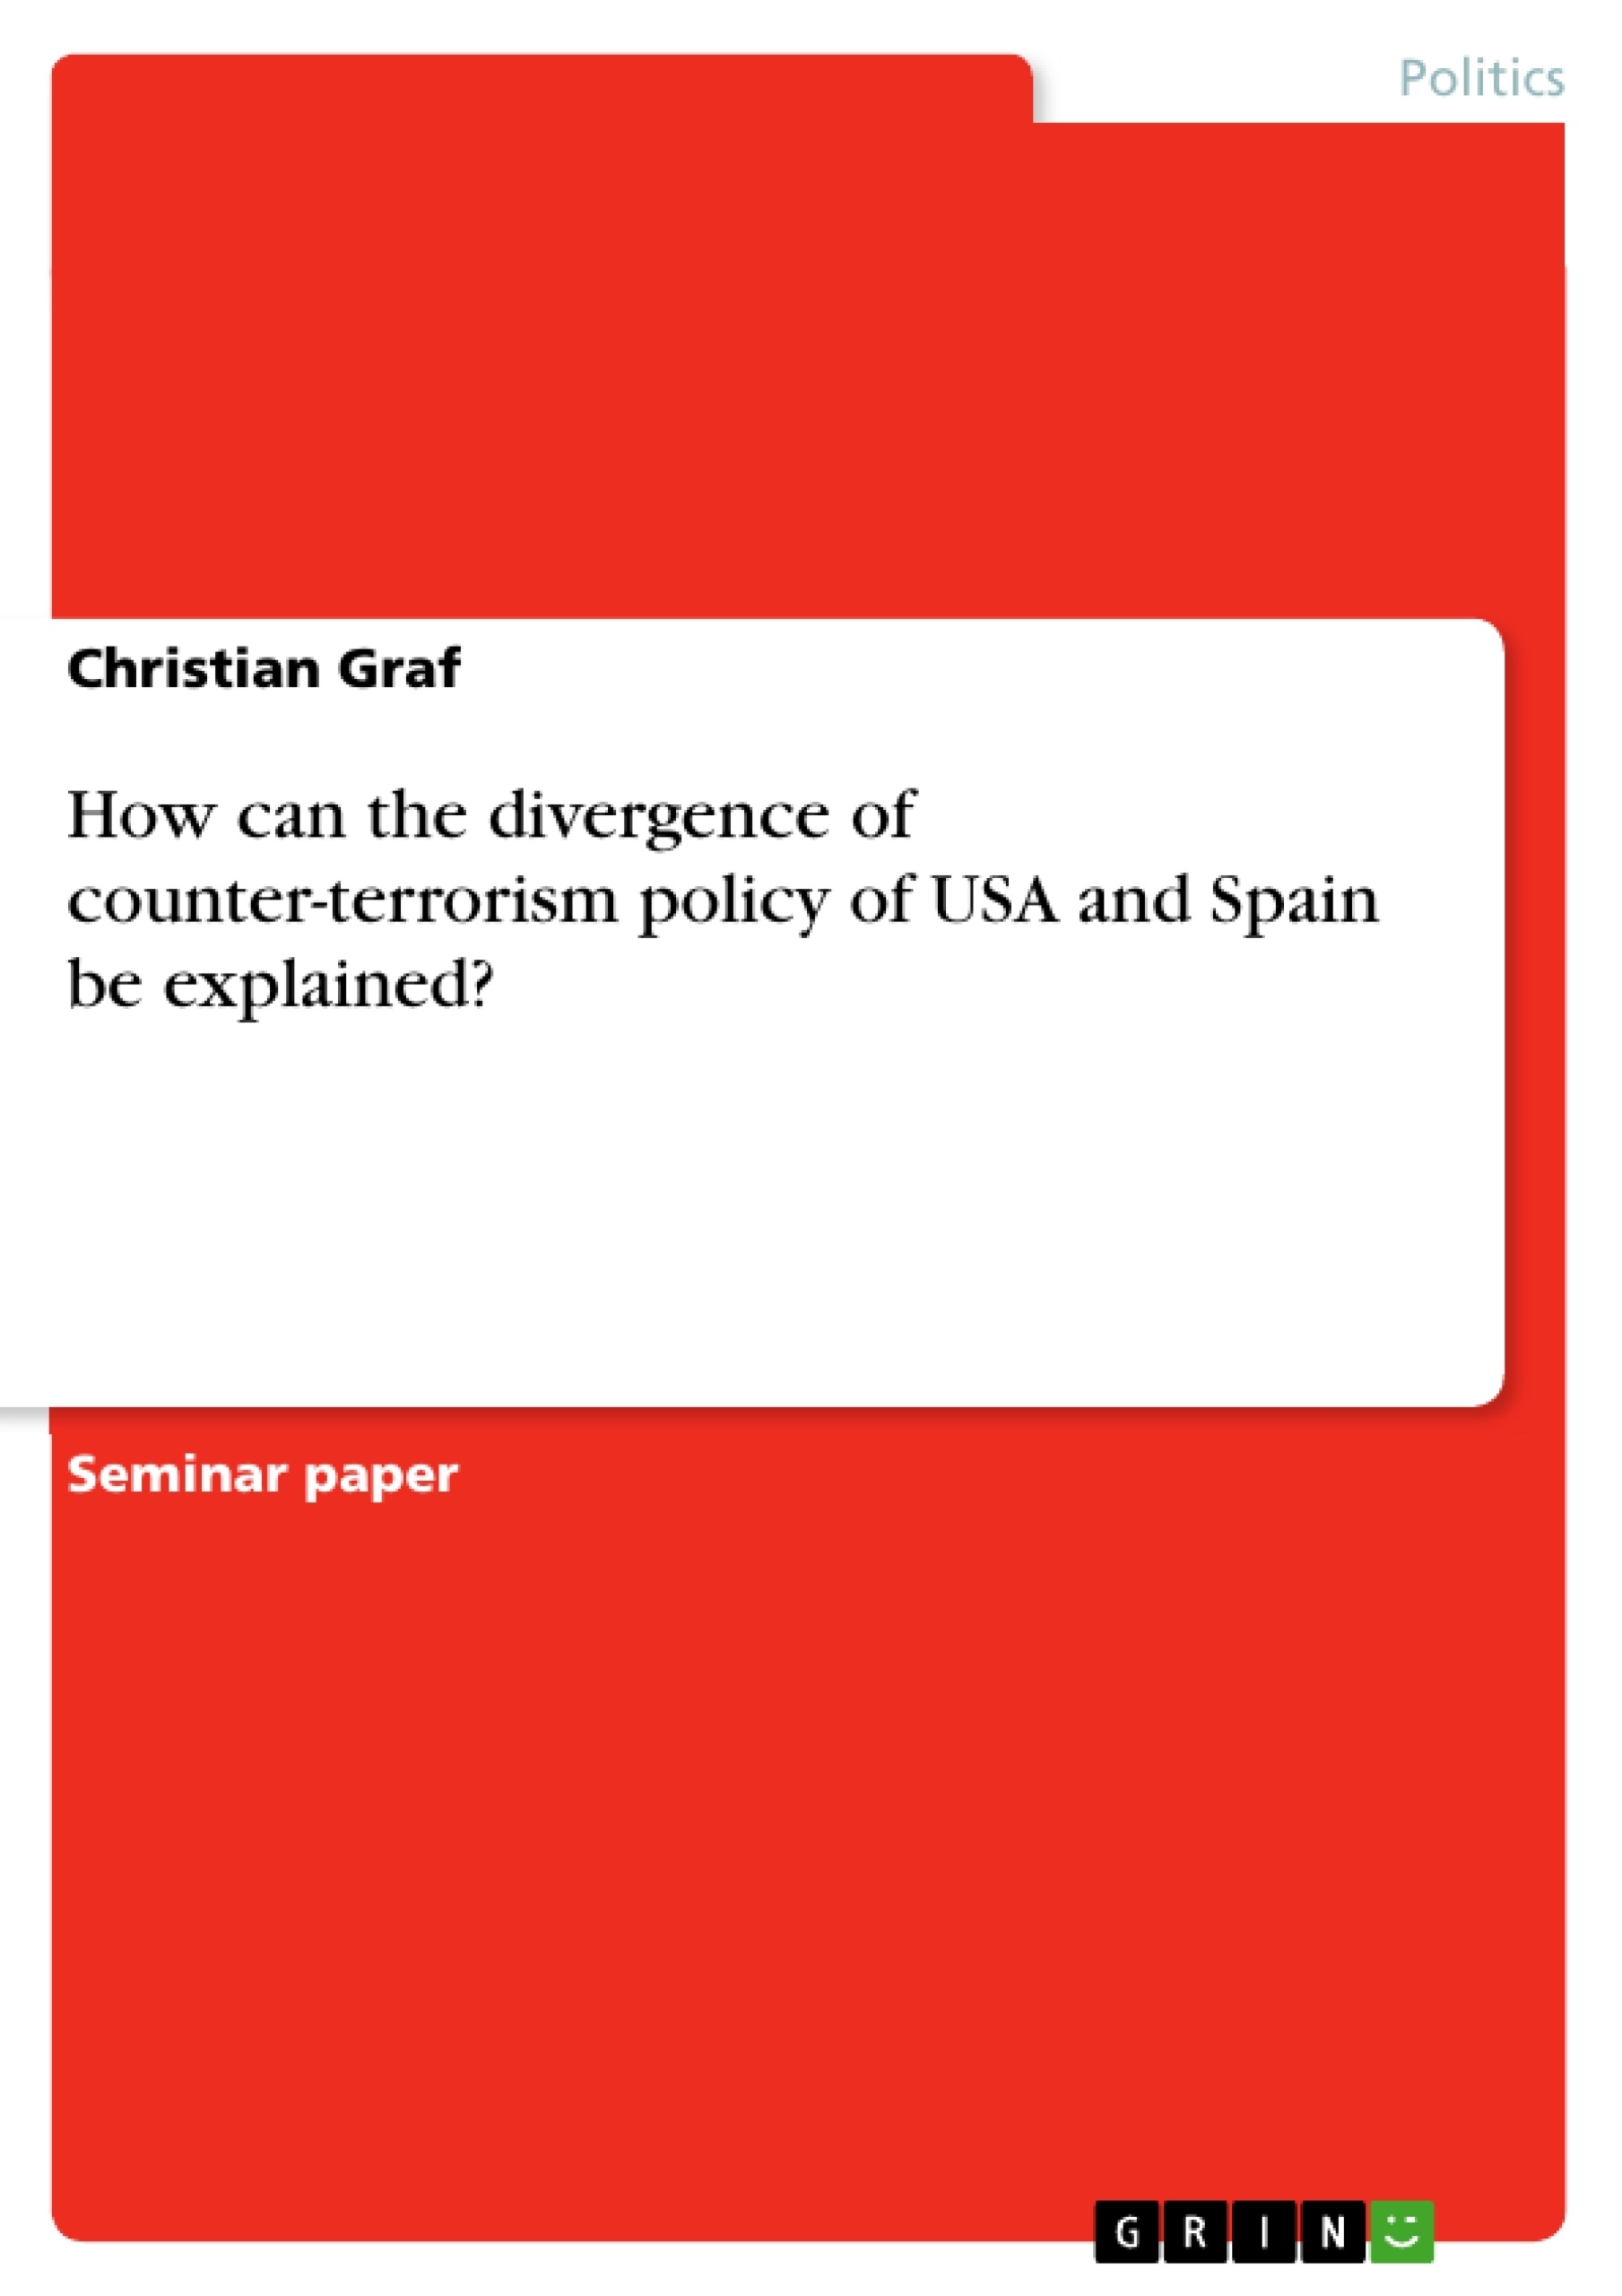 Título: How can the divergence of counter-terrorism policy of USA and Spain be explained?